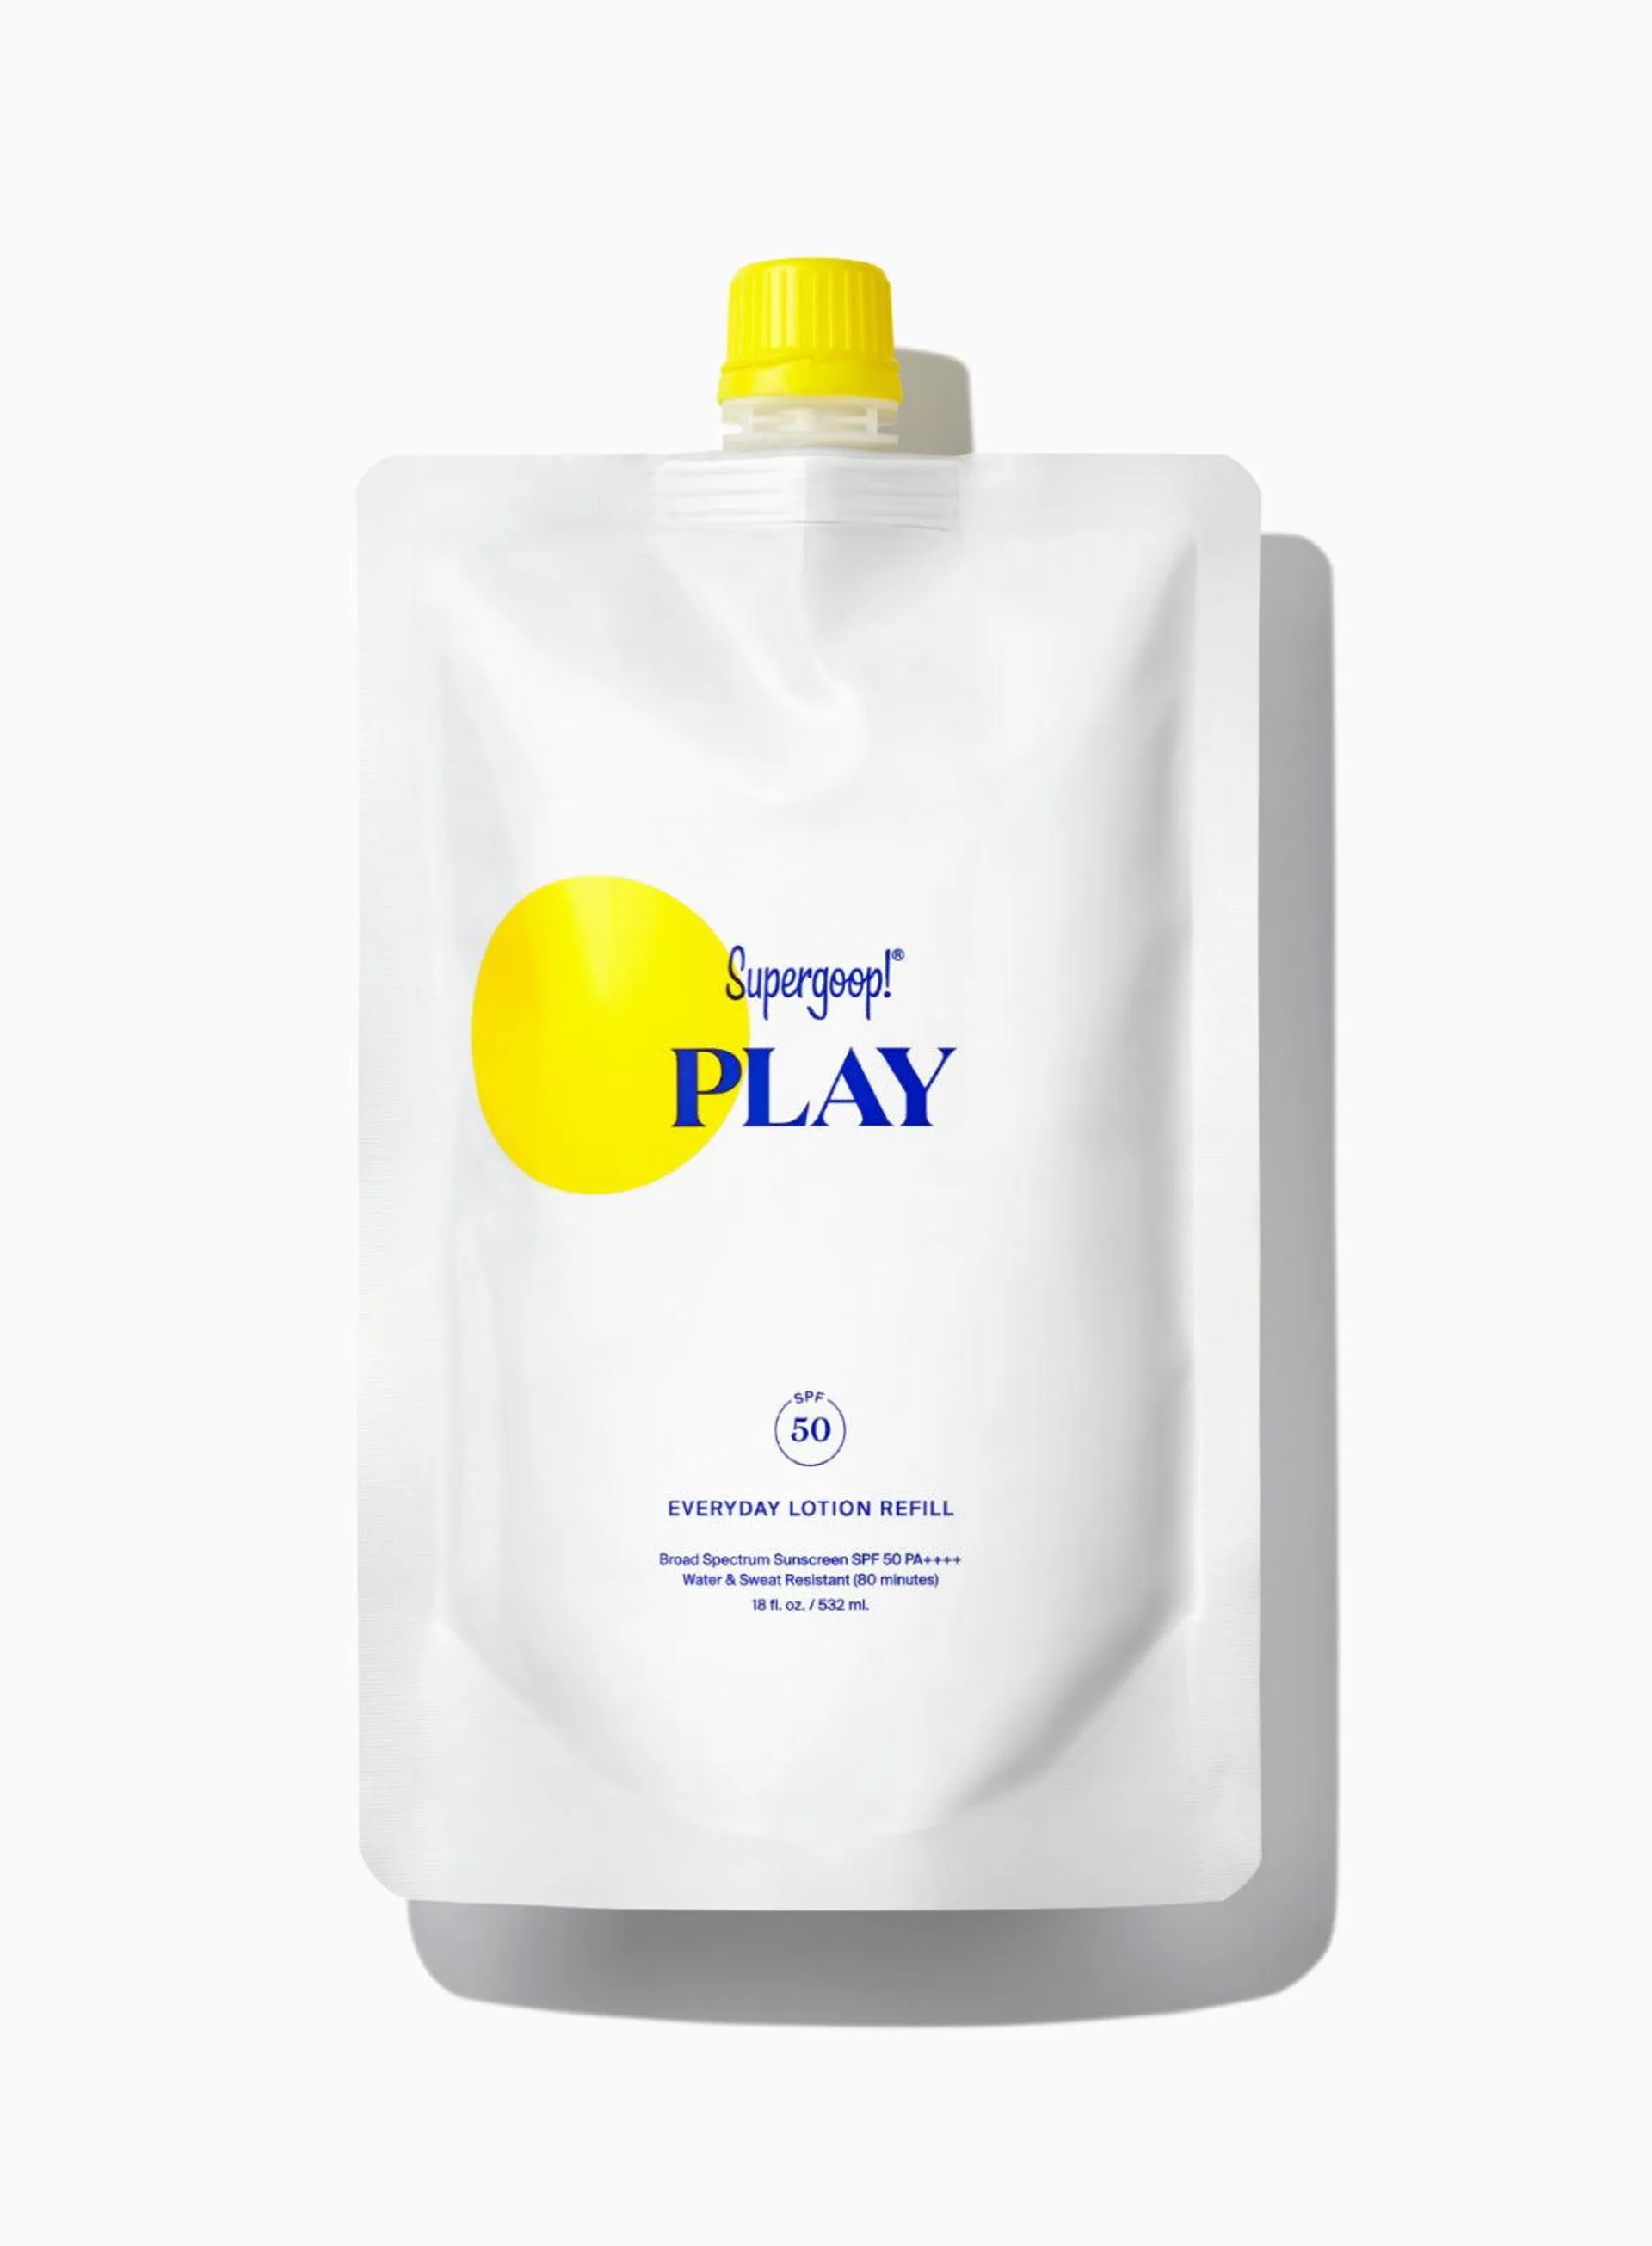 PLAY Everyday Lotion SPF 50 Pump Refill Pouch